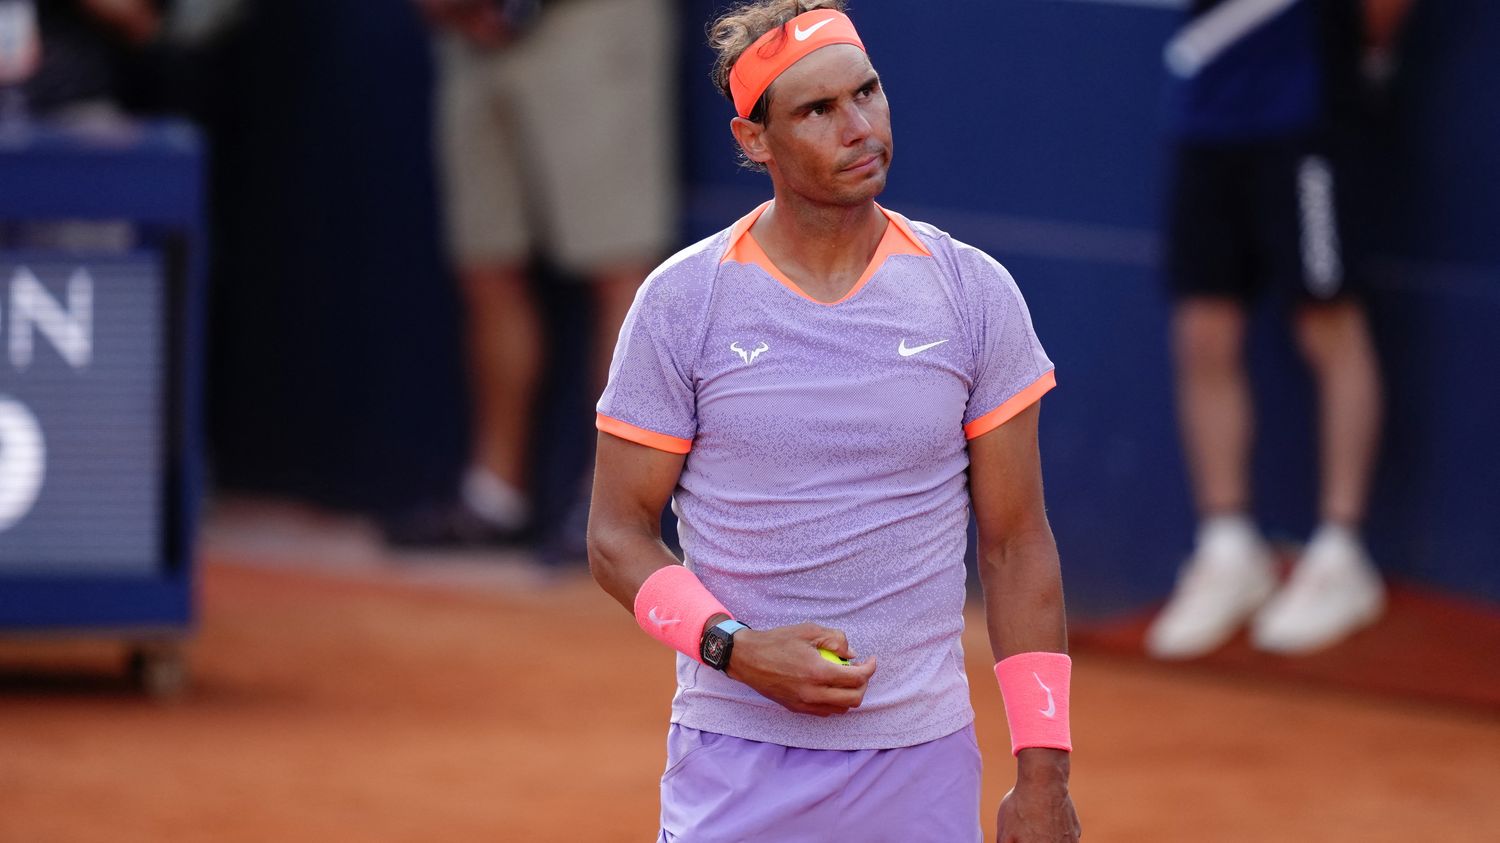 Tennis: Rafael Nadal eliminated in the second round of the tournament in Barcelona